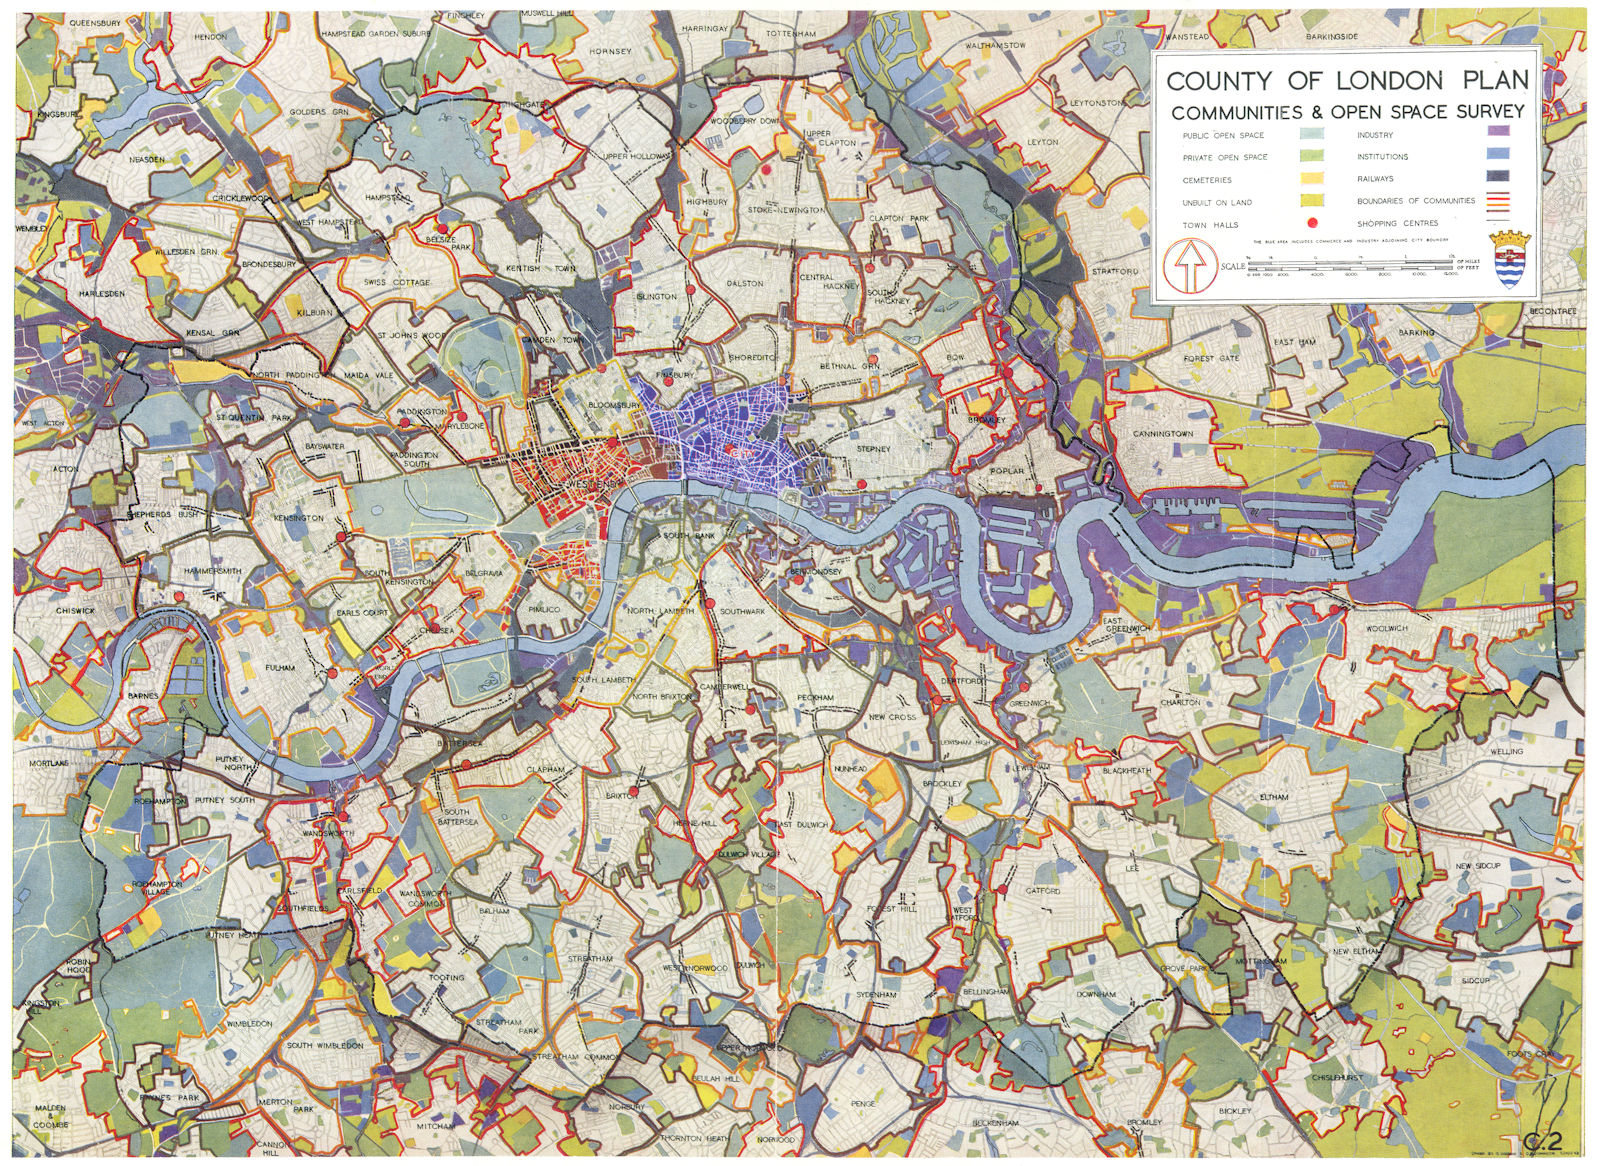 LONDON. County of London plan communities & open space survey 1943 old map